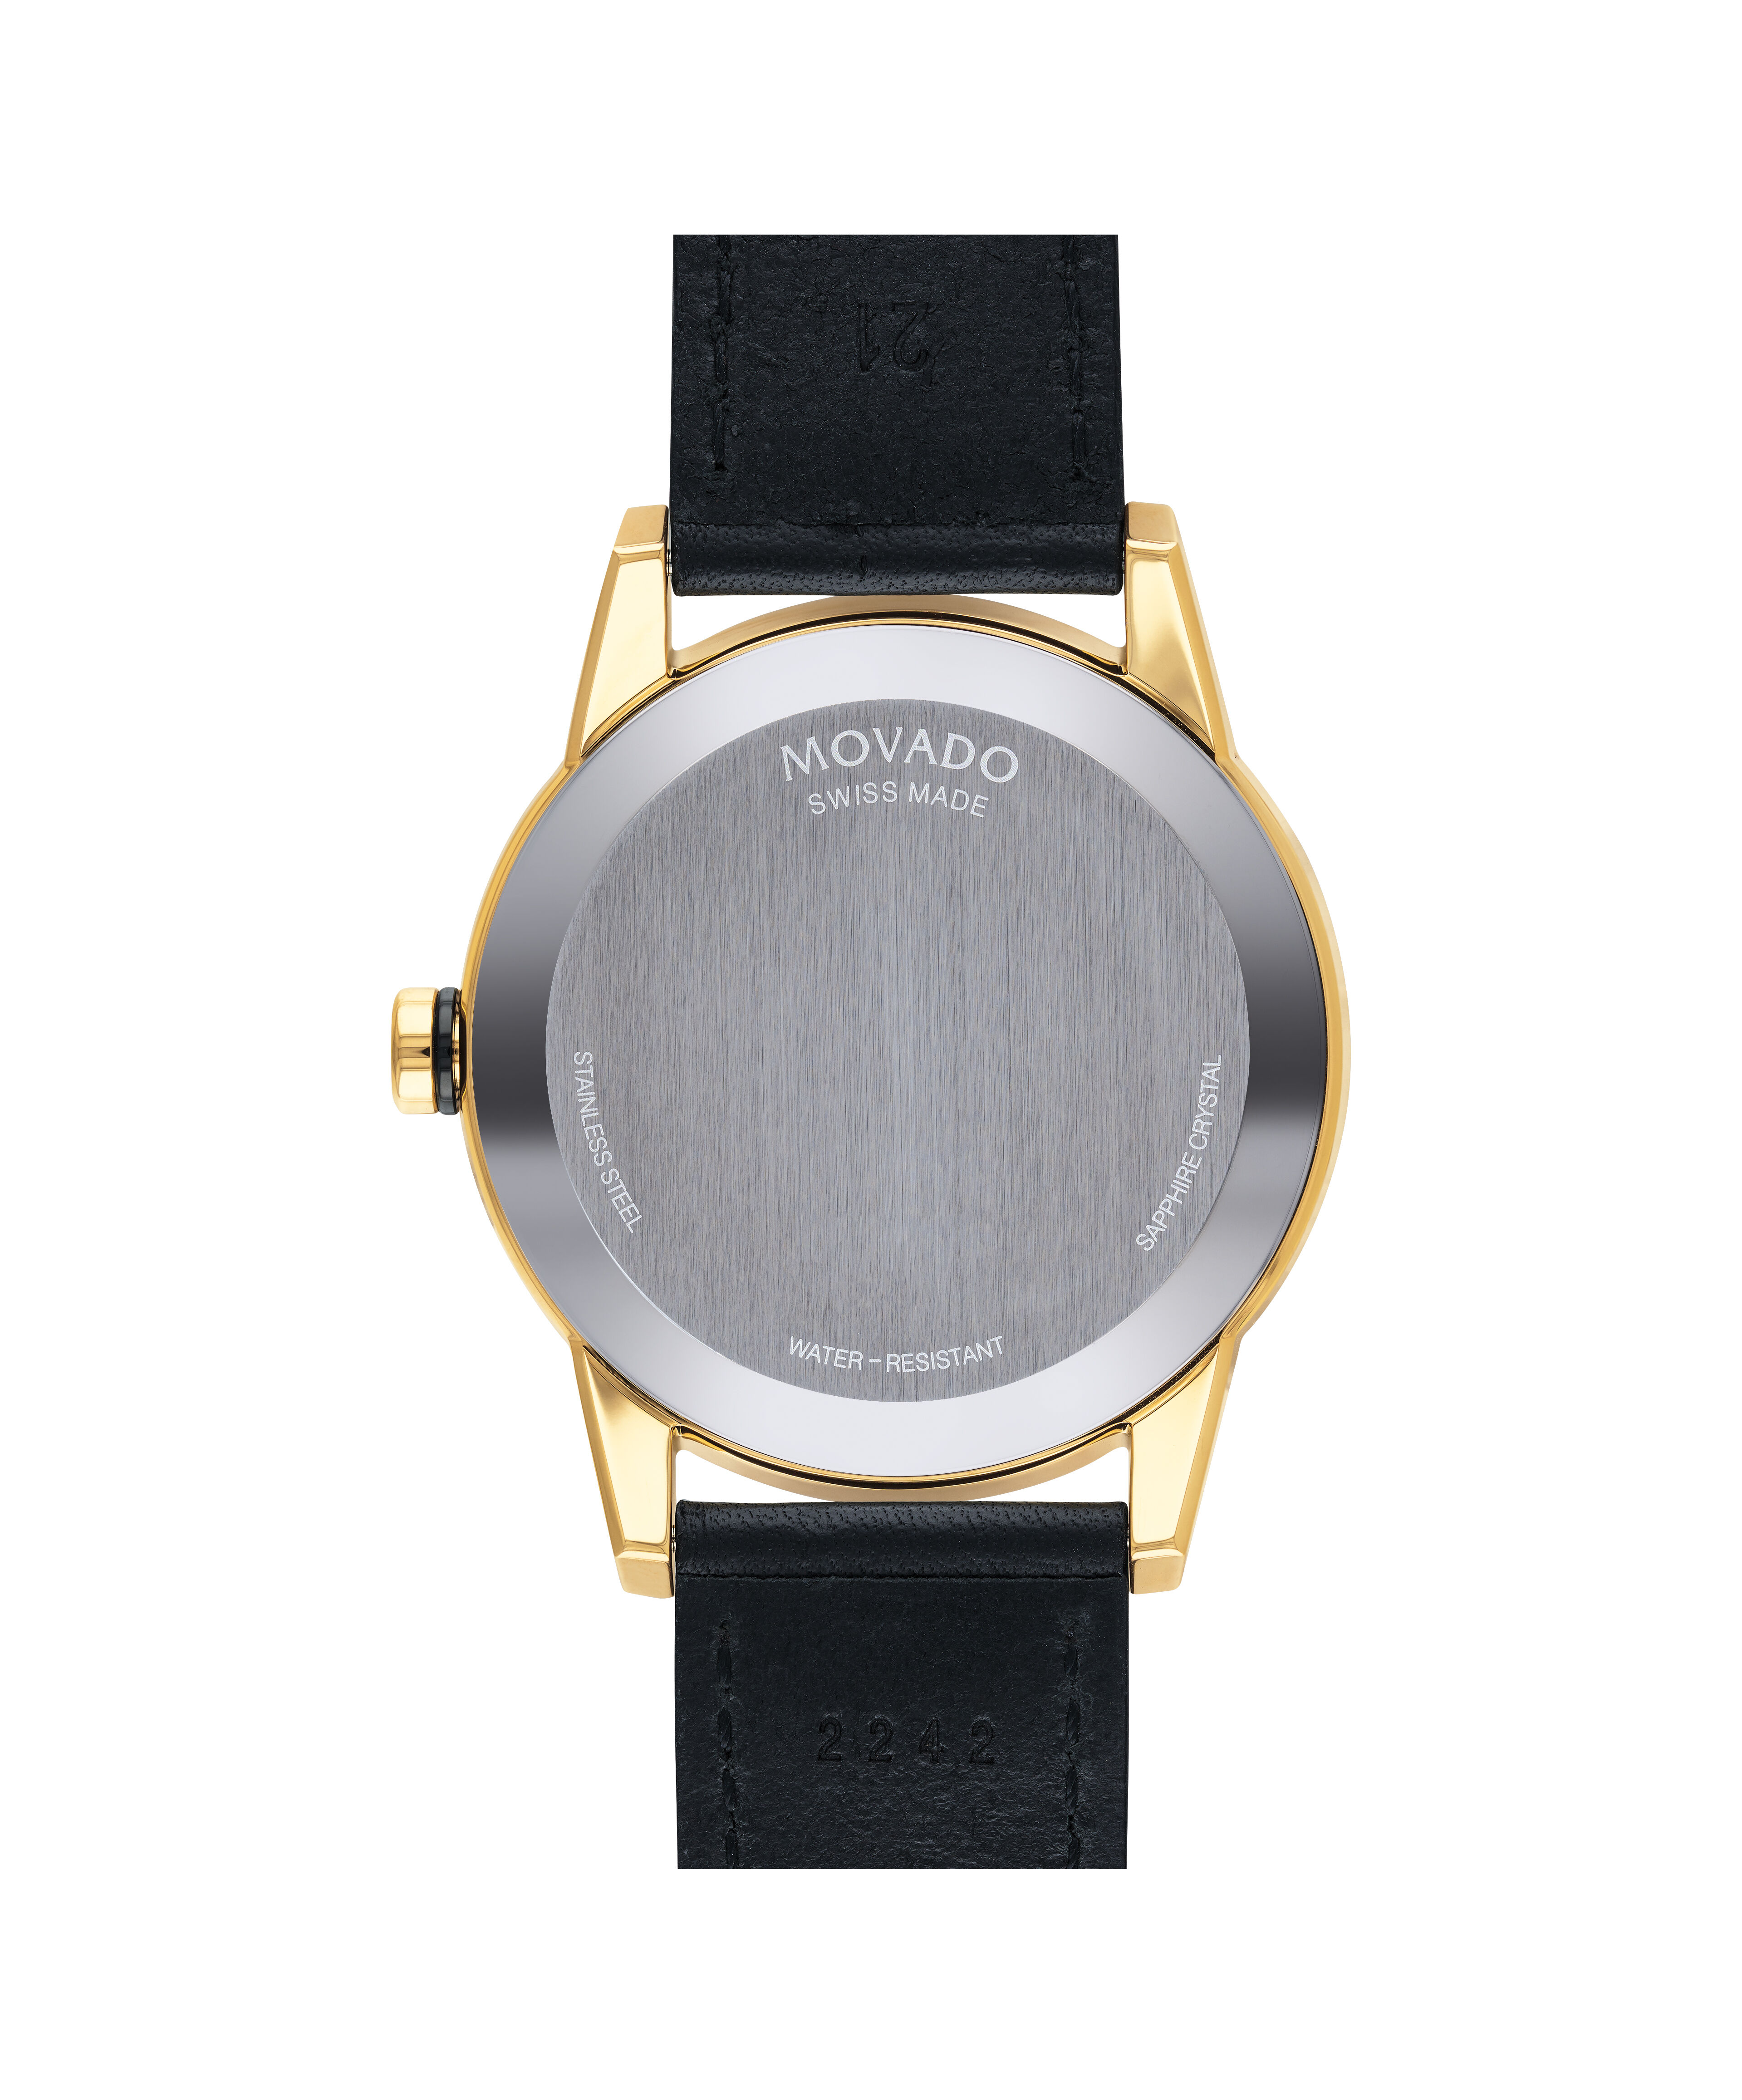 Movado Men's Movado Museum Classic 0.04 CT. T.W. Diamond Two-Tone PVD Watch with Black Dial - 607202